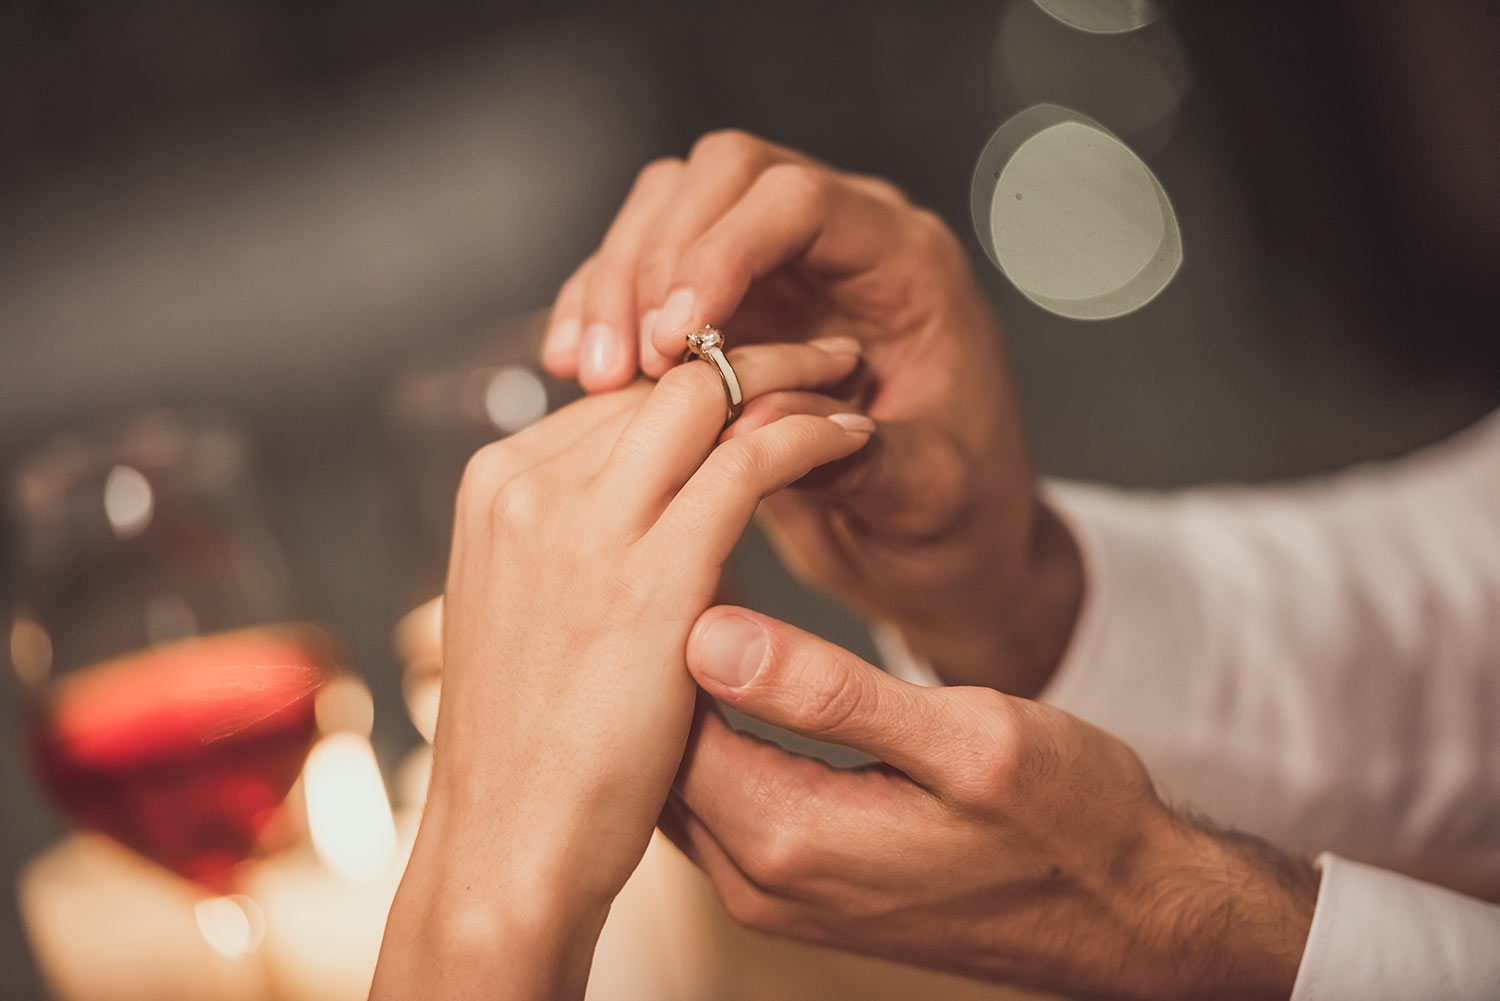 15 Important Questions To Ask Your Partner Before Getting Engaged